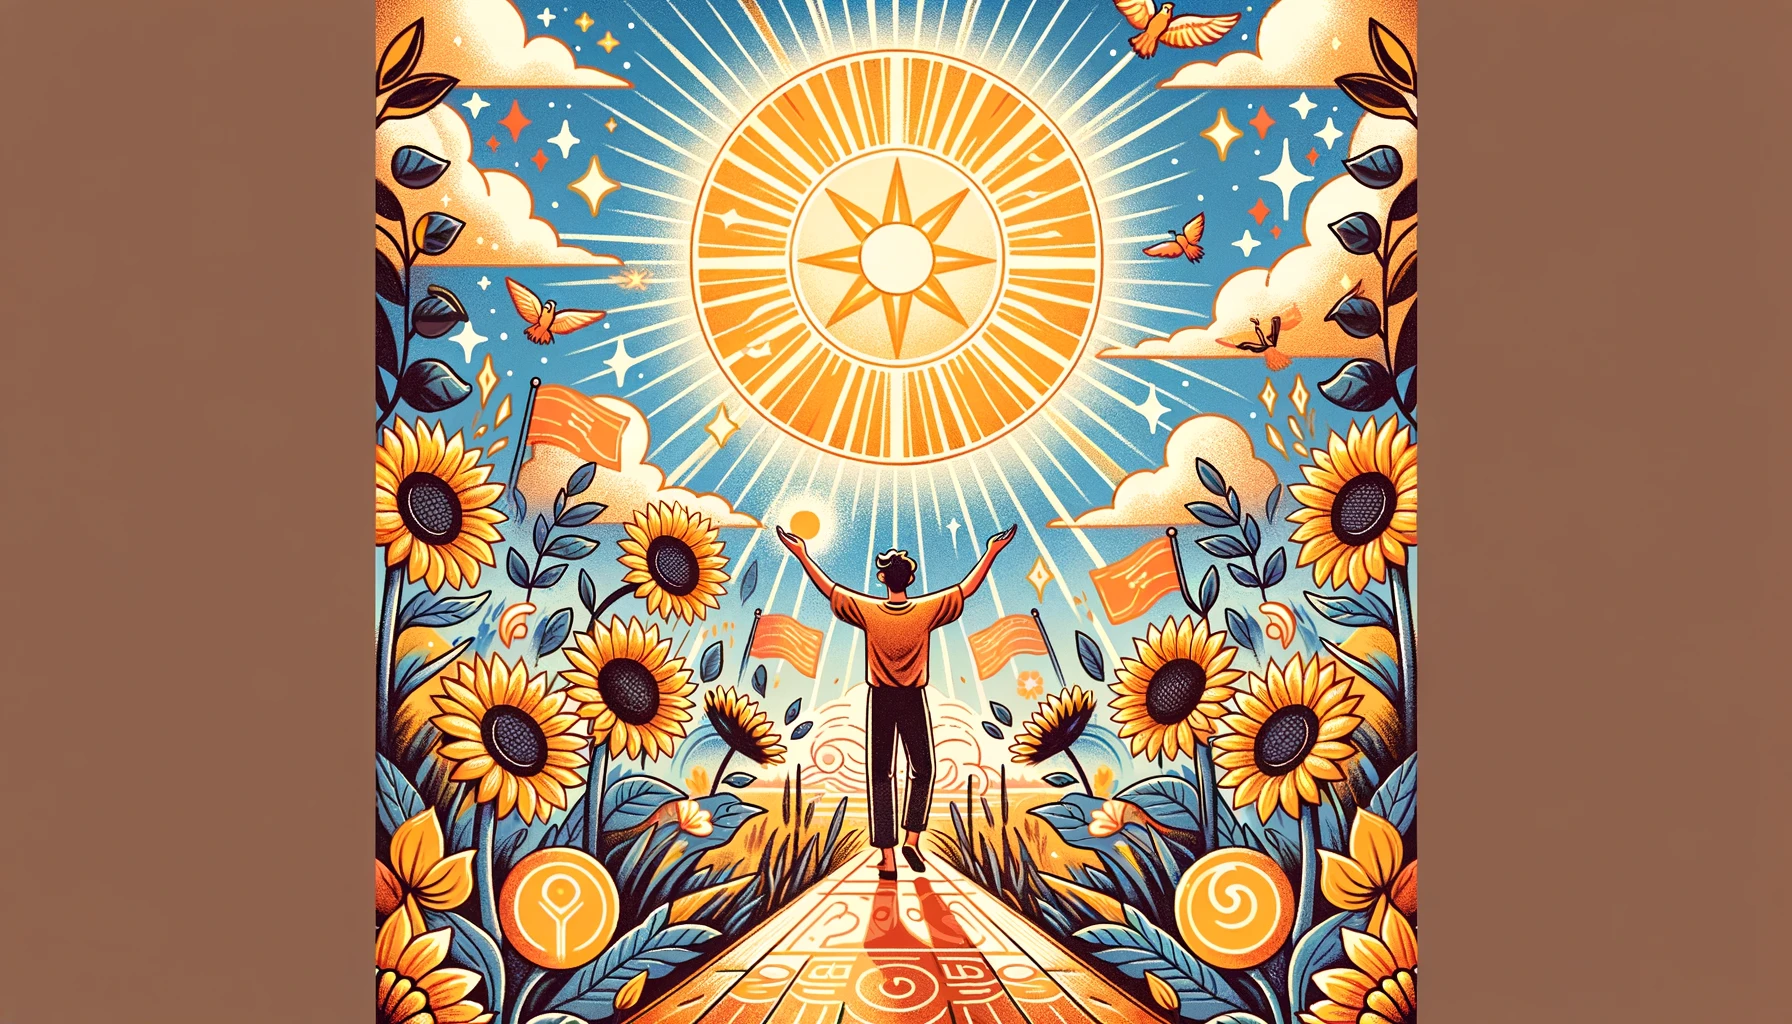 "Illustration portraying vitality, positivity, and radiance associated with 'The Sun' Tarot card. Sets a vibrant and life-affirming tone for your article discussing its representation of character traits, including joy, creativity, and positive thinking."